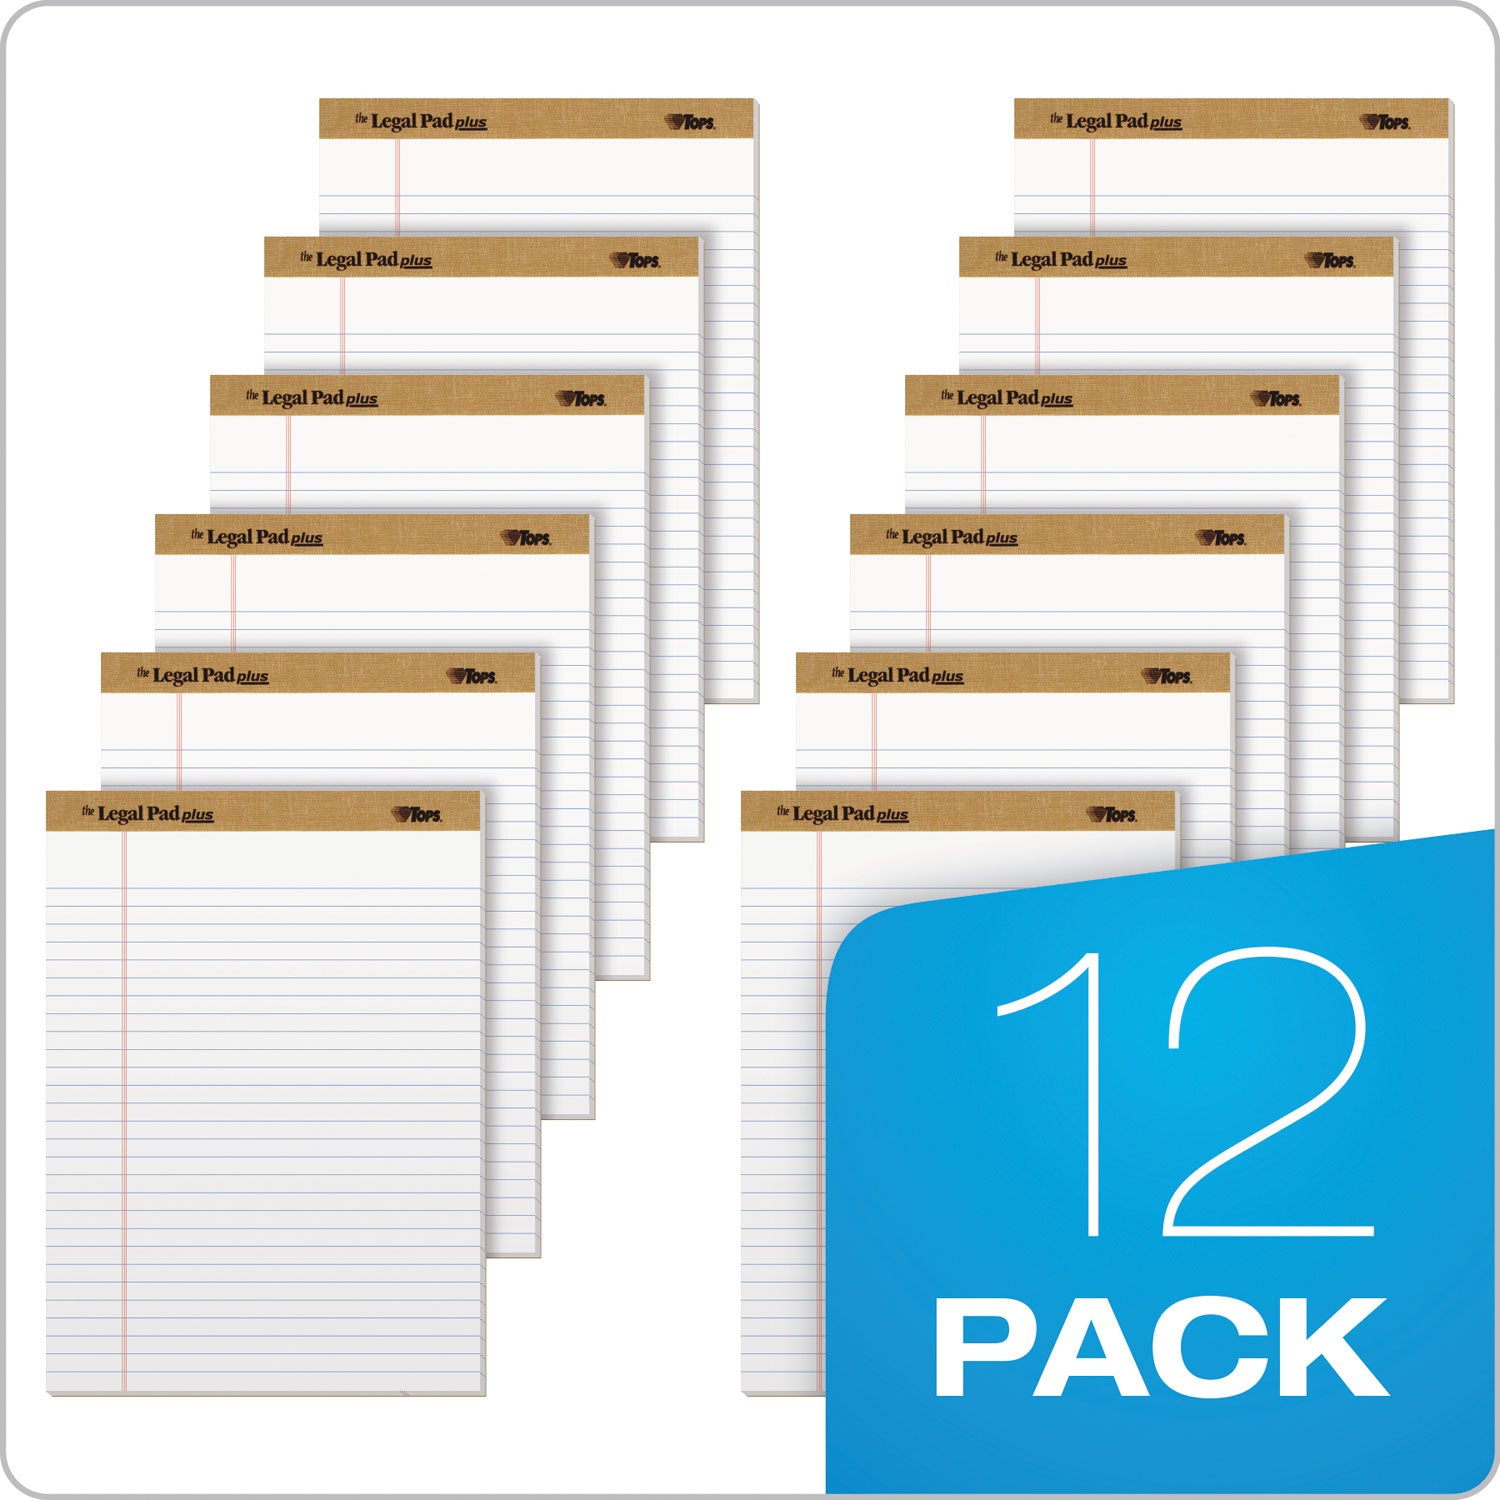 The Legal Pad" Plus Ruled Perforated Pads with 40 pt. Back, Wide/Legal Rule, 50 White 8.5 x 11.75 Sheets, Dozen - 